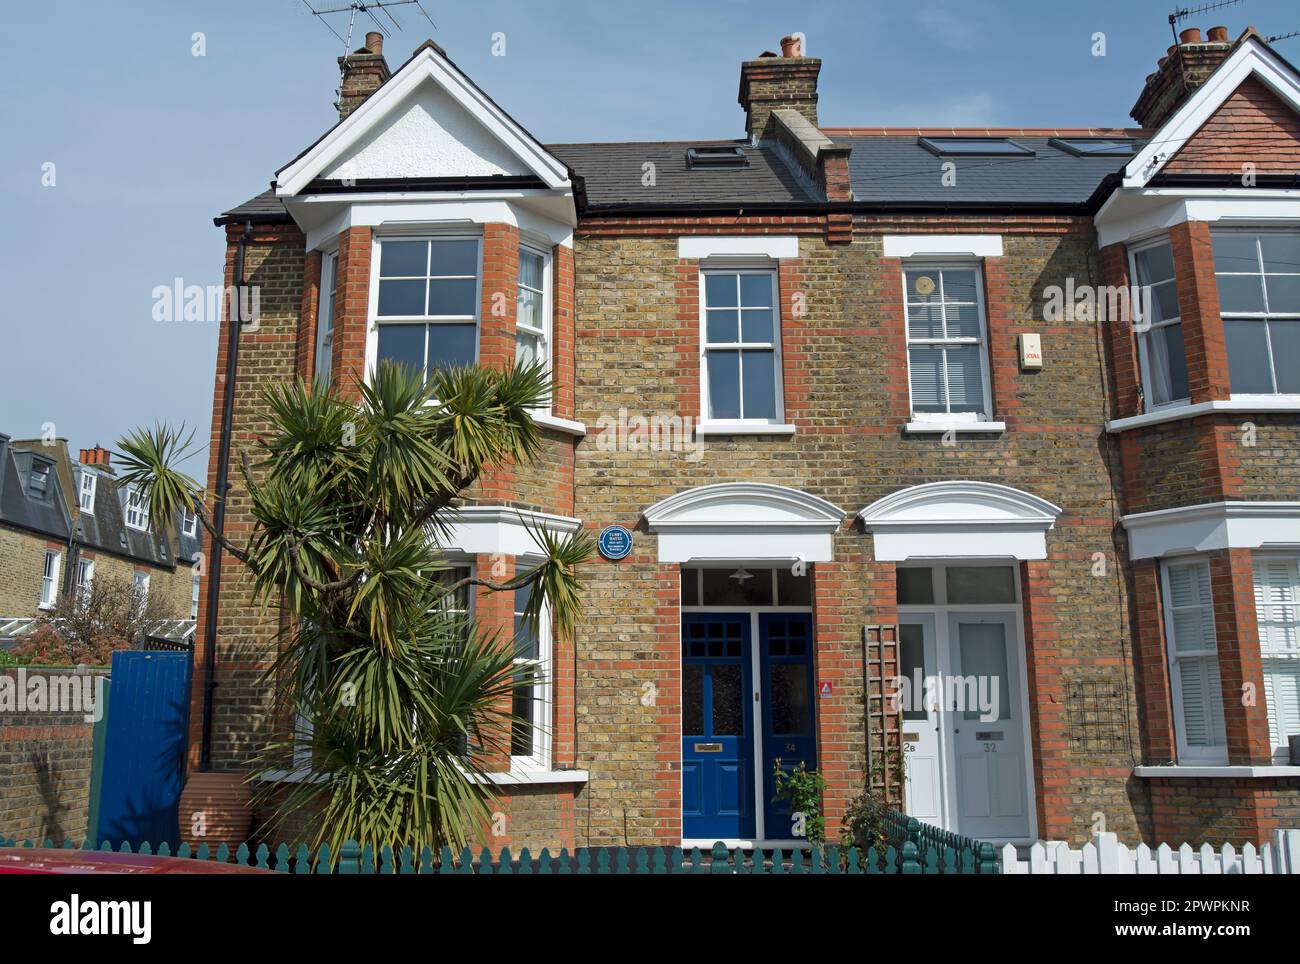 marked by a heritage foundation blue plaque, a home of jazz musician tubby hayes, raynes park, southwest london, england Stock Photo